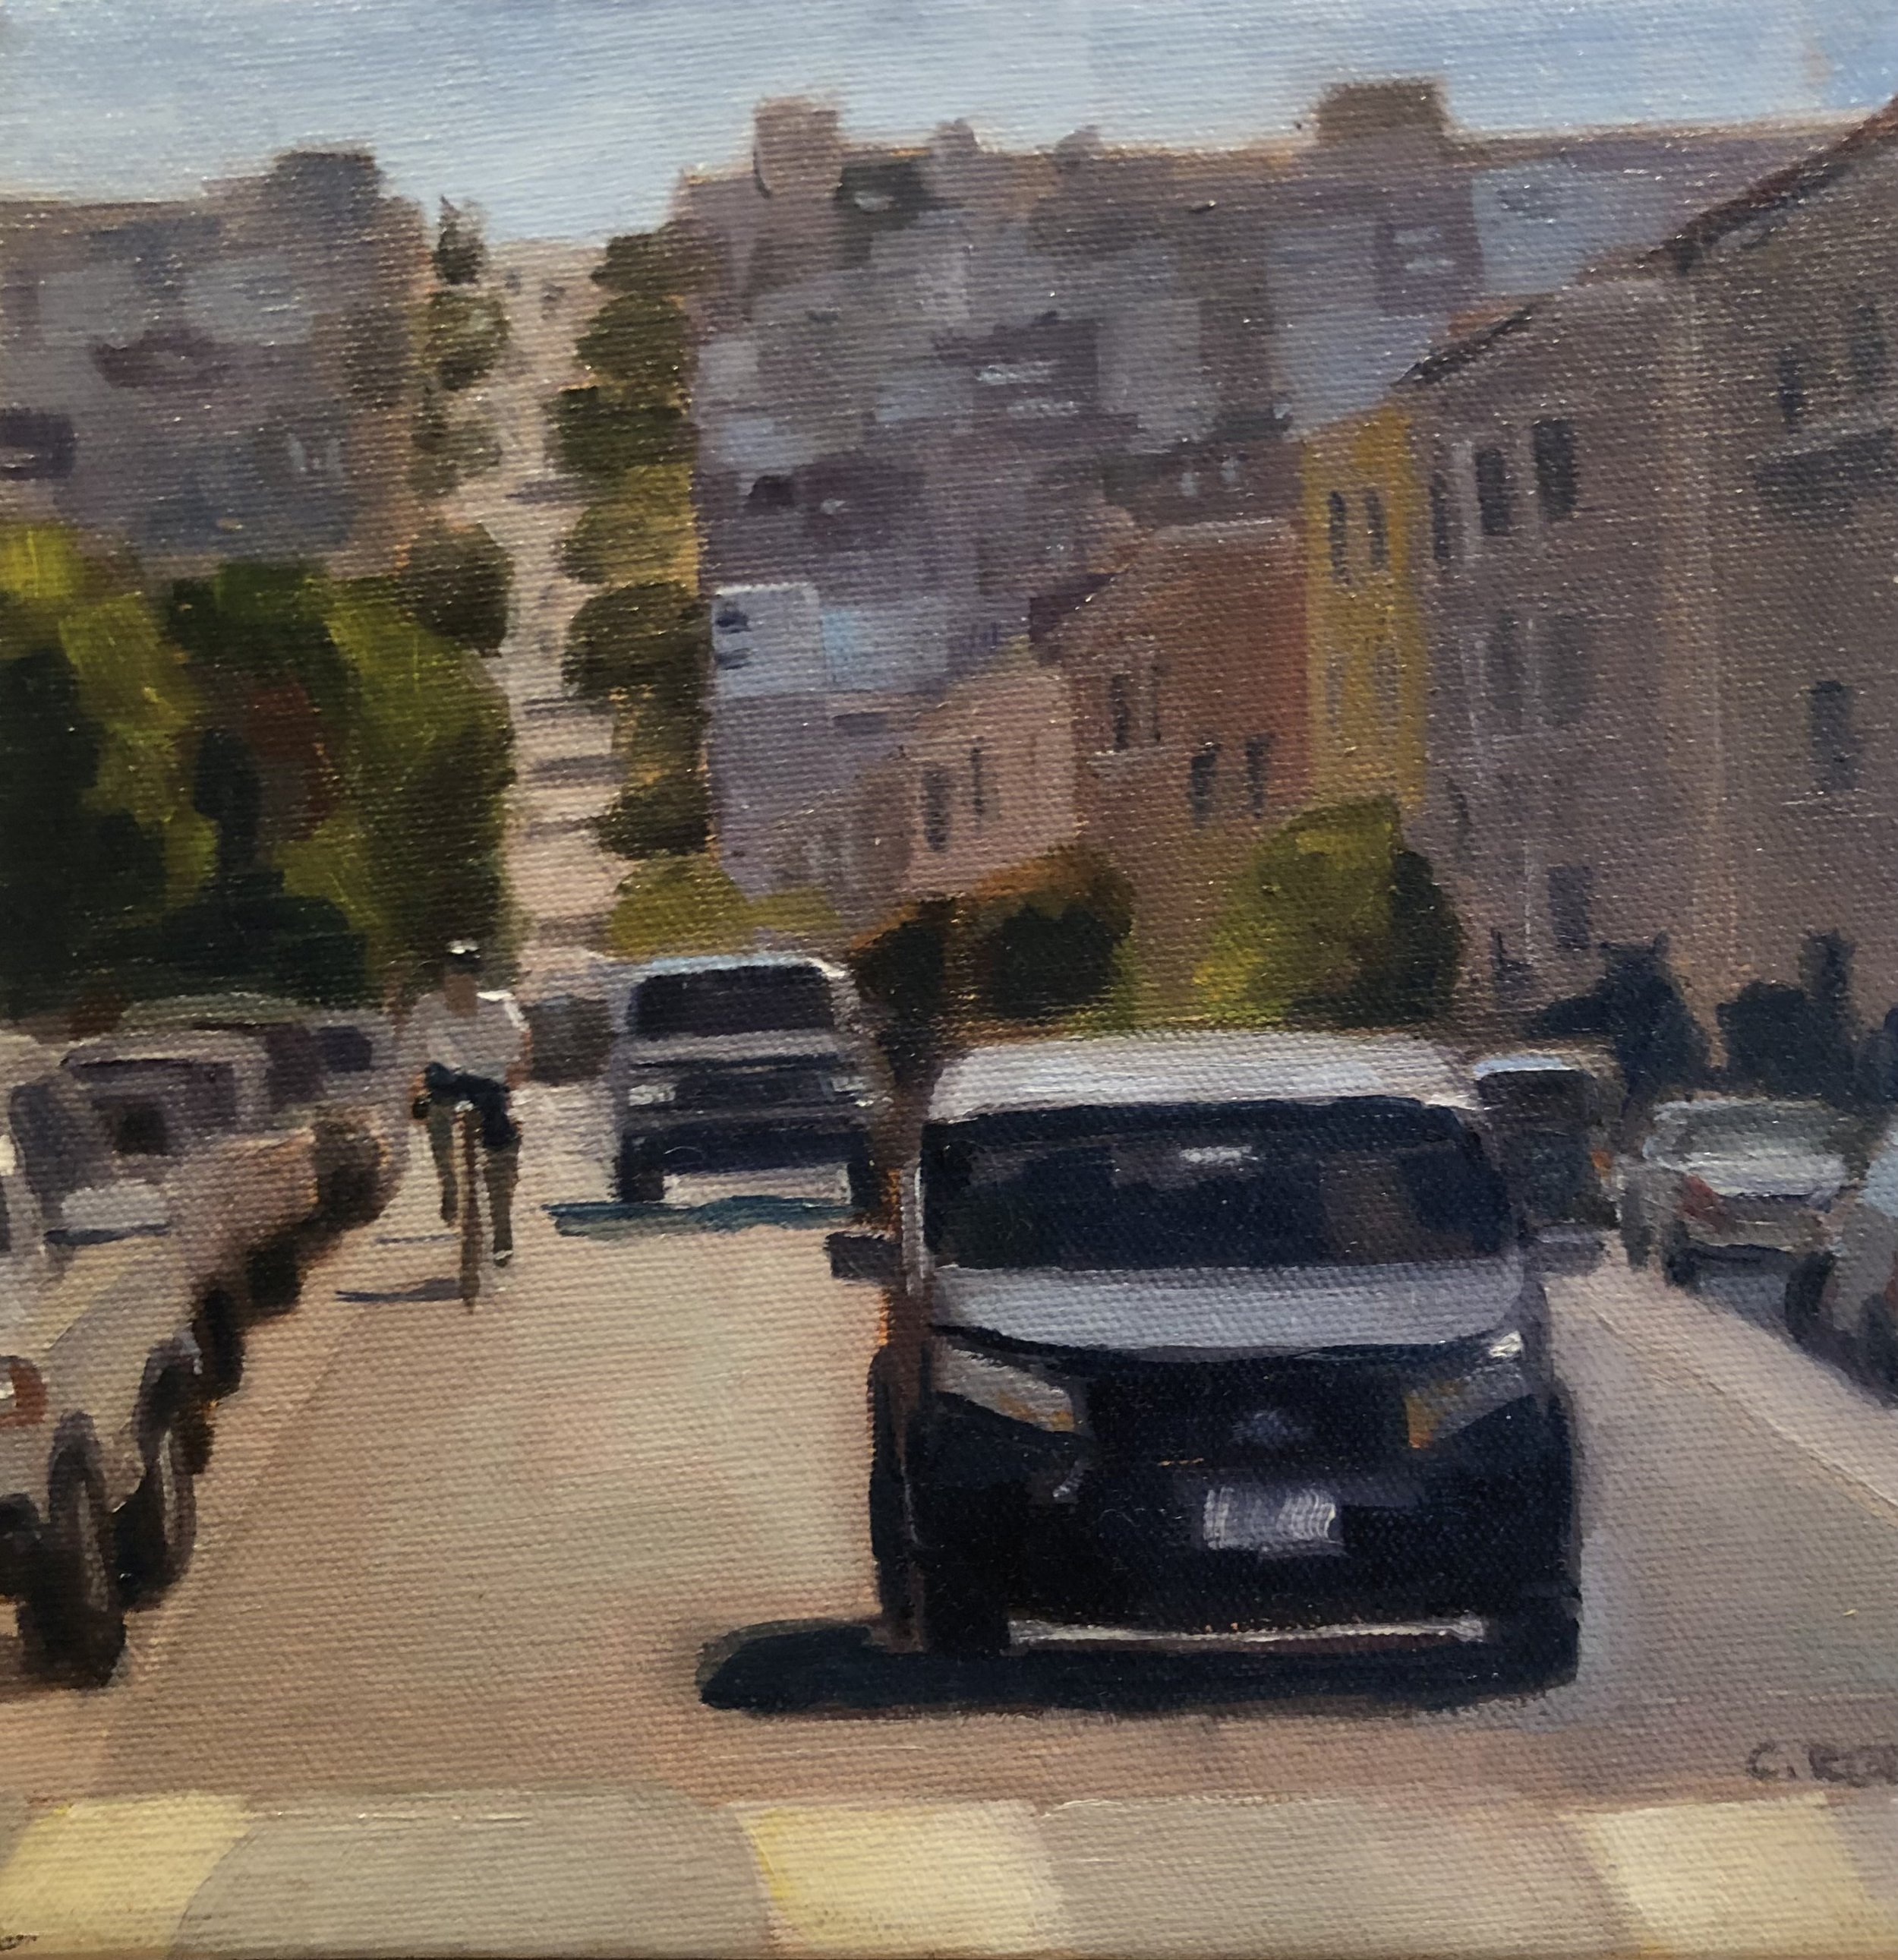 Looking Uphill on Lombard by Carla Roth